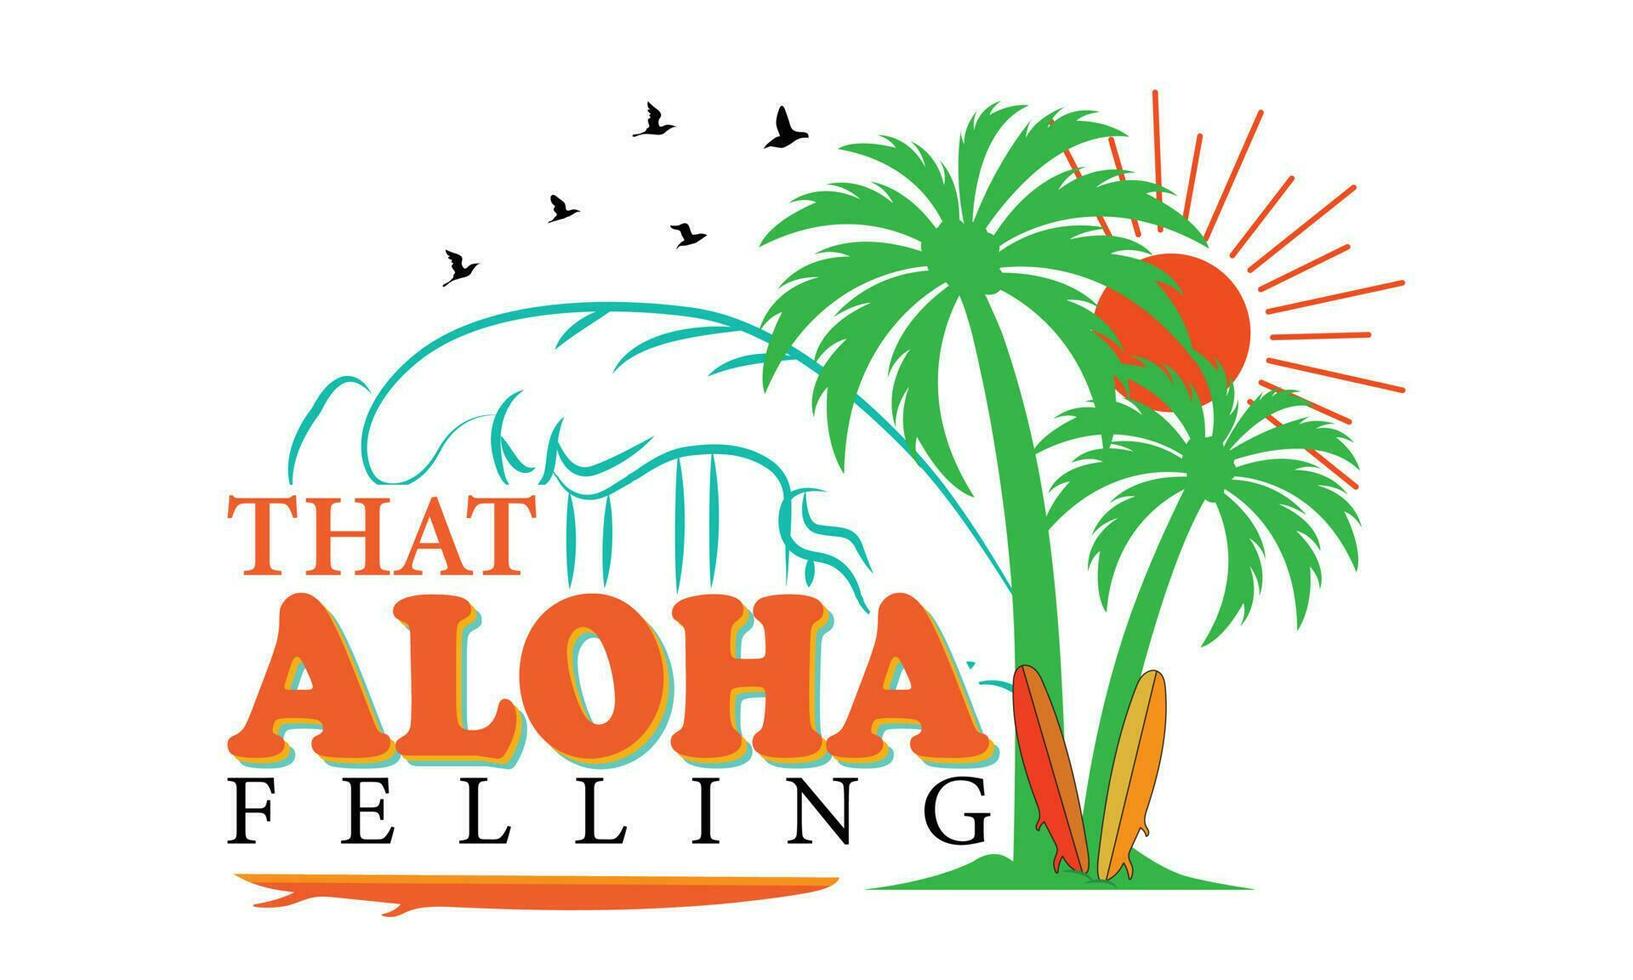 That Aloha Felling T-shirt Design Vector Illustration, Aloha Hawaii floral t-shirt print. Surf paradise, pacific ocean typography. Surfing related apparel design. Vector vintage illustration.